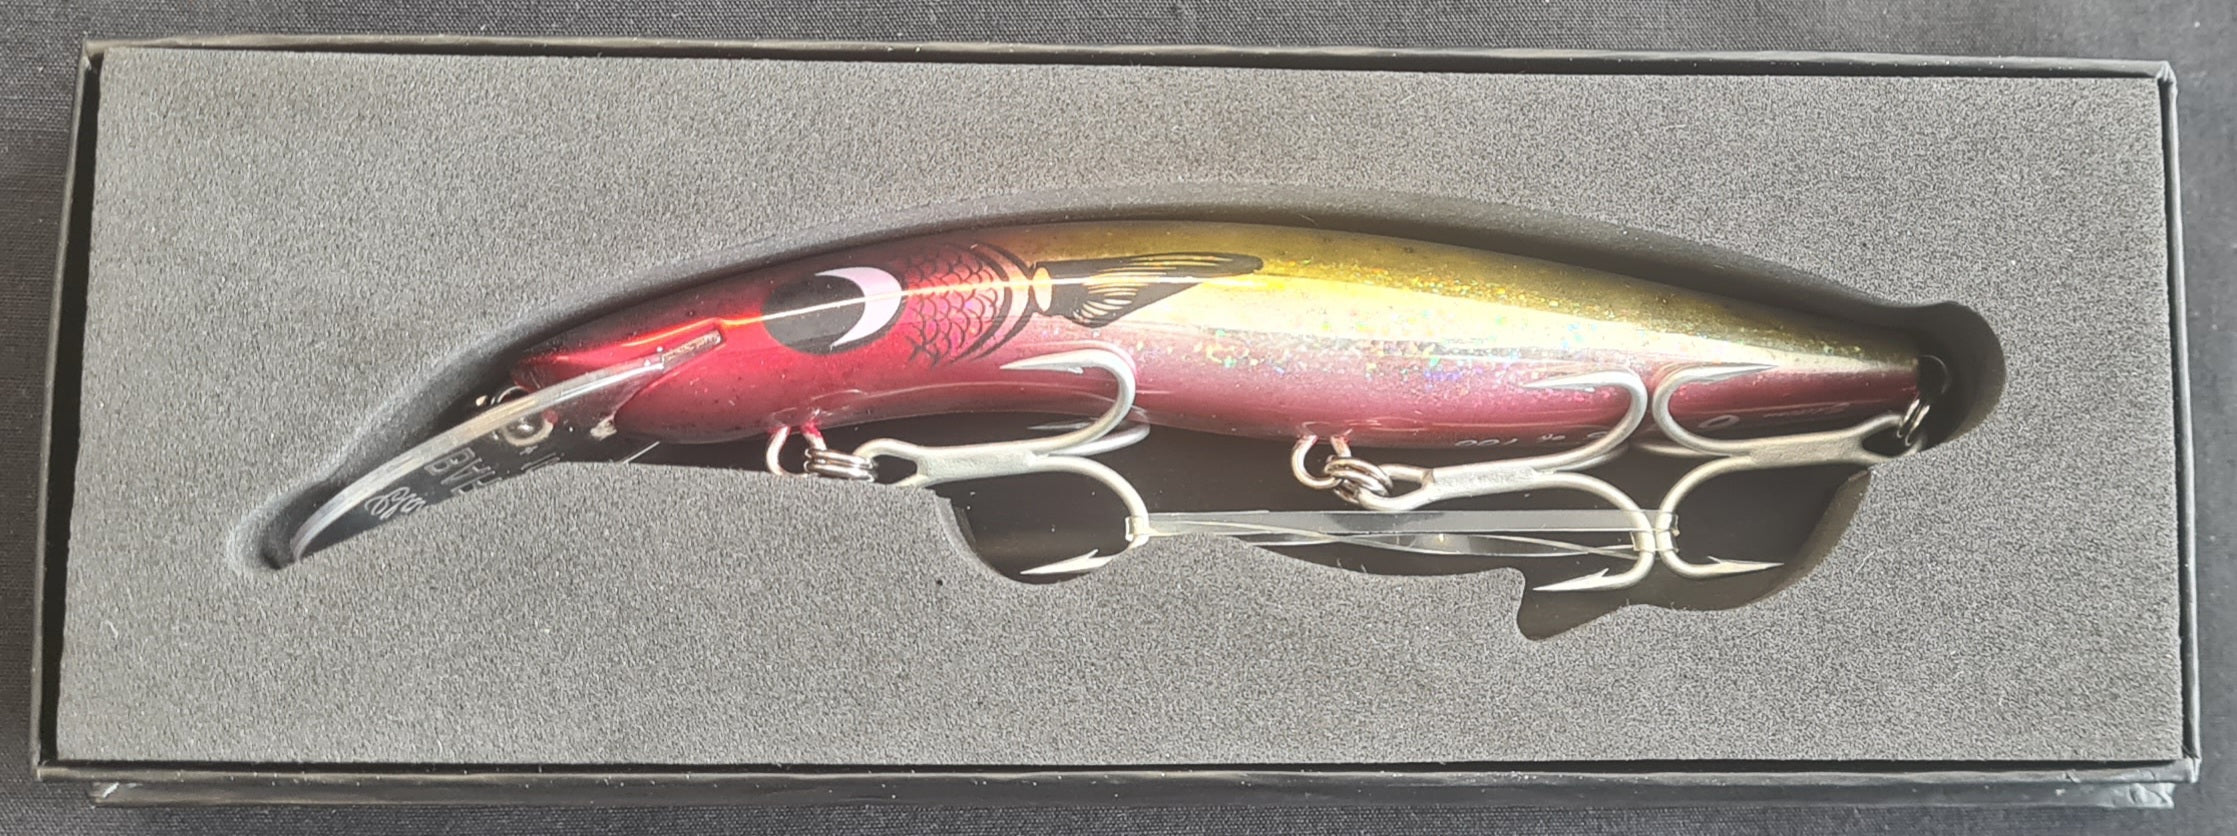 Lure Parts Online - The Classic Lure Series is here! LurePartsOnline.com  now has everything you need to re-create some old classic lures. And these  baits really catch fish. Absolutely nothing tops a